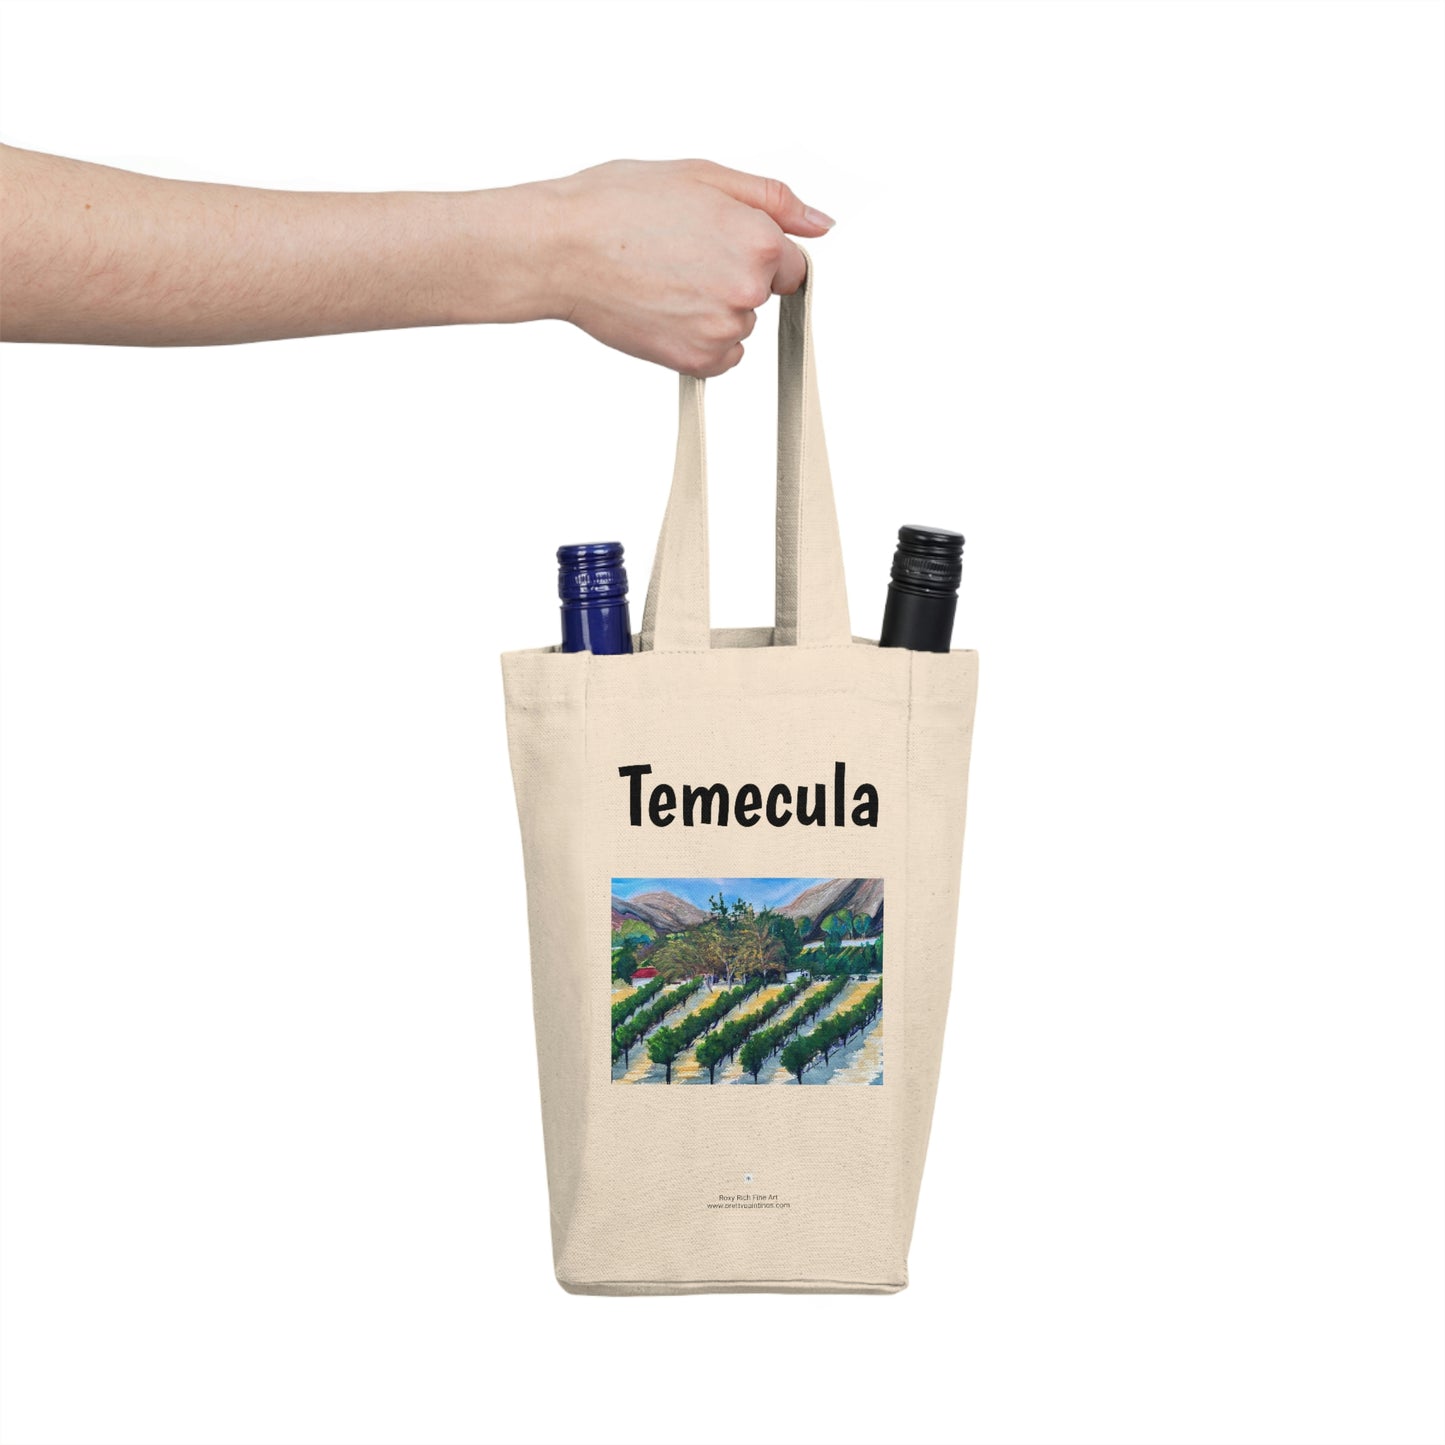 Temecula Double Wine Tote Bag featuring "Kirk's View at Somerset" painting